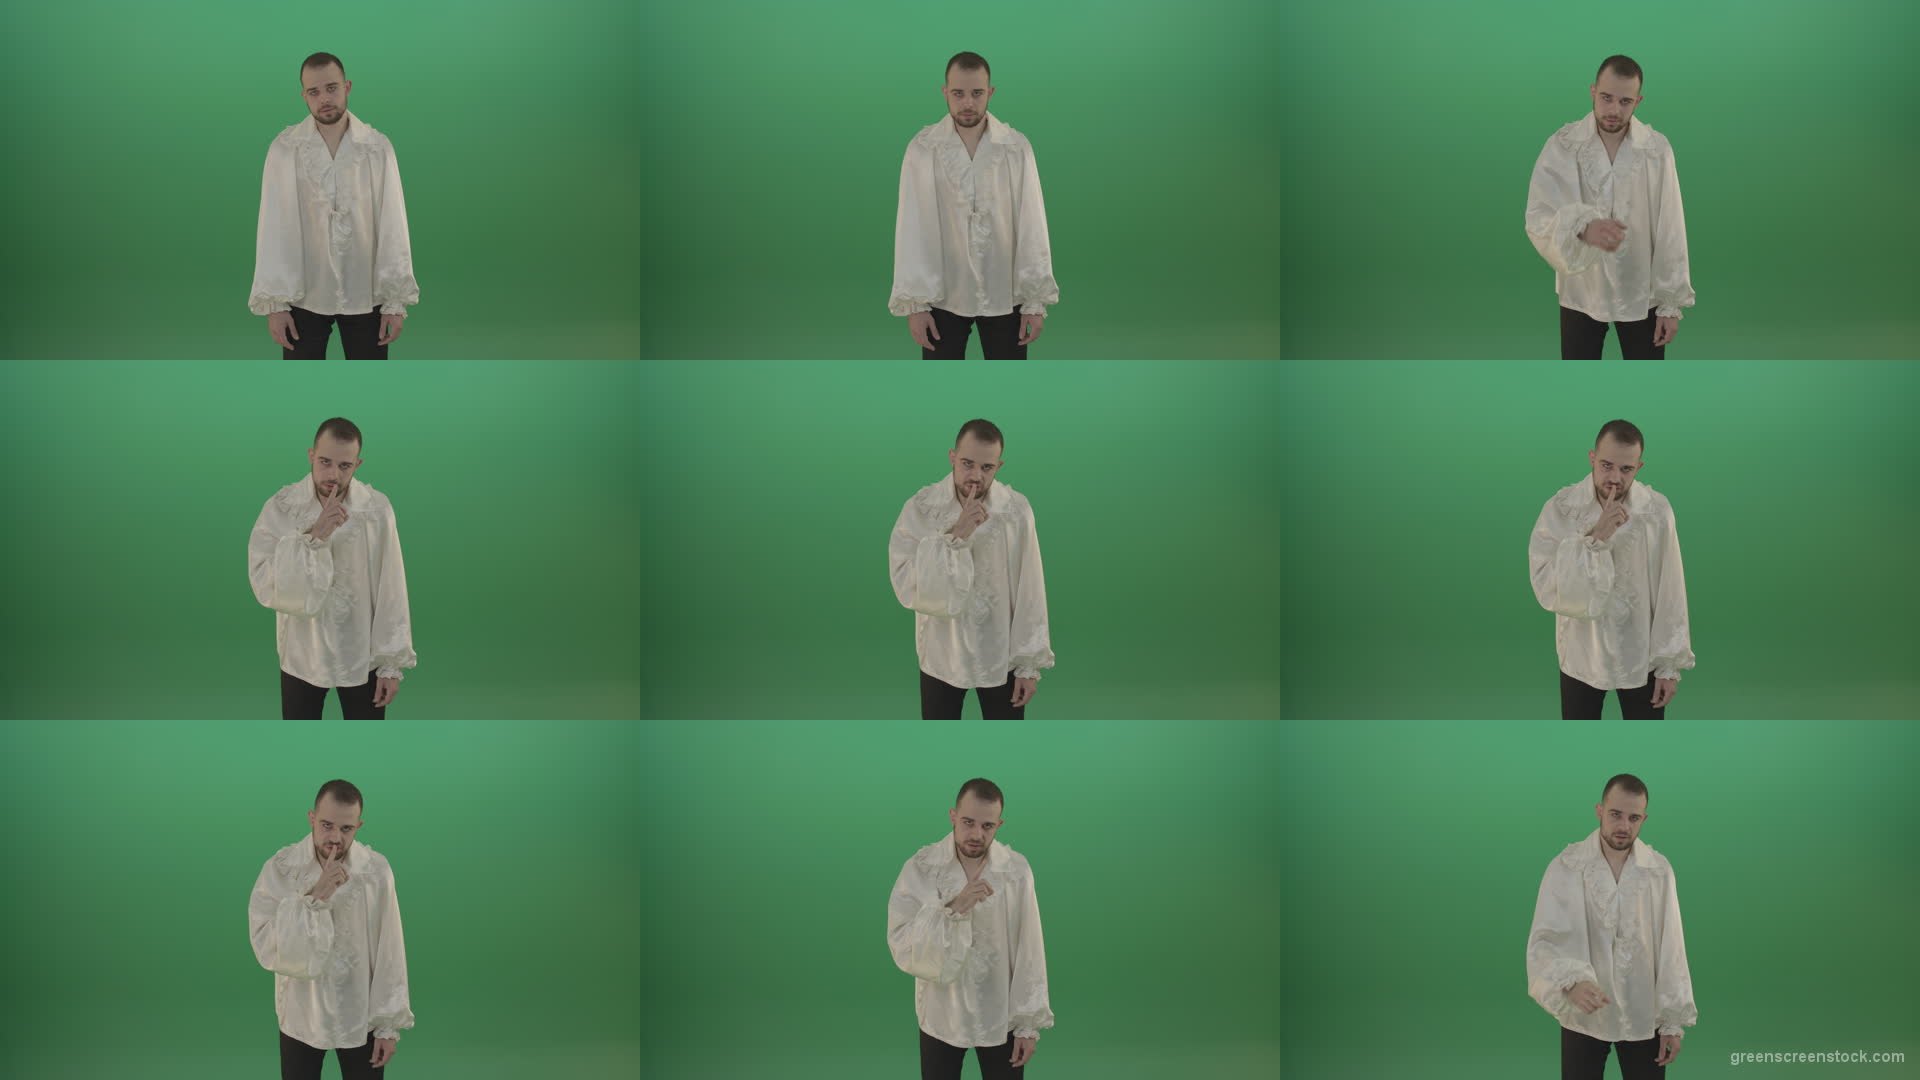 Maniac-man-was-very-angry-asking-for-silence-showing-sign-isolated-in-green-screen-studio Green Screen Stock